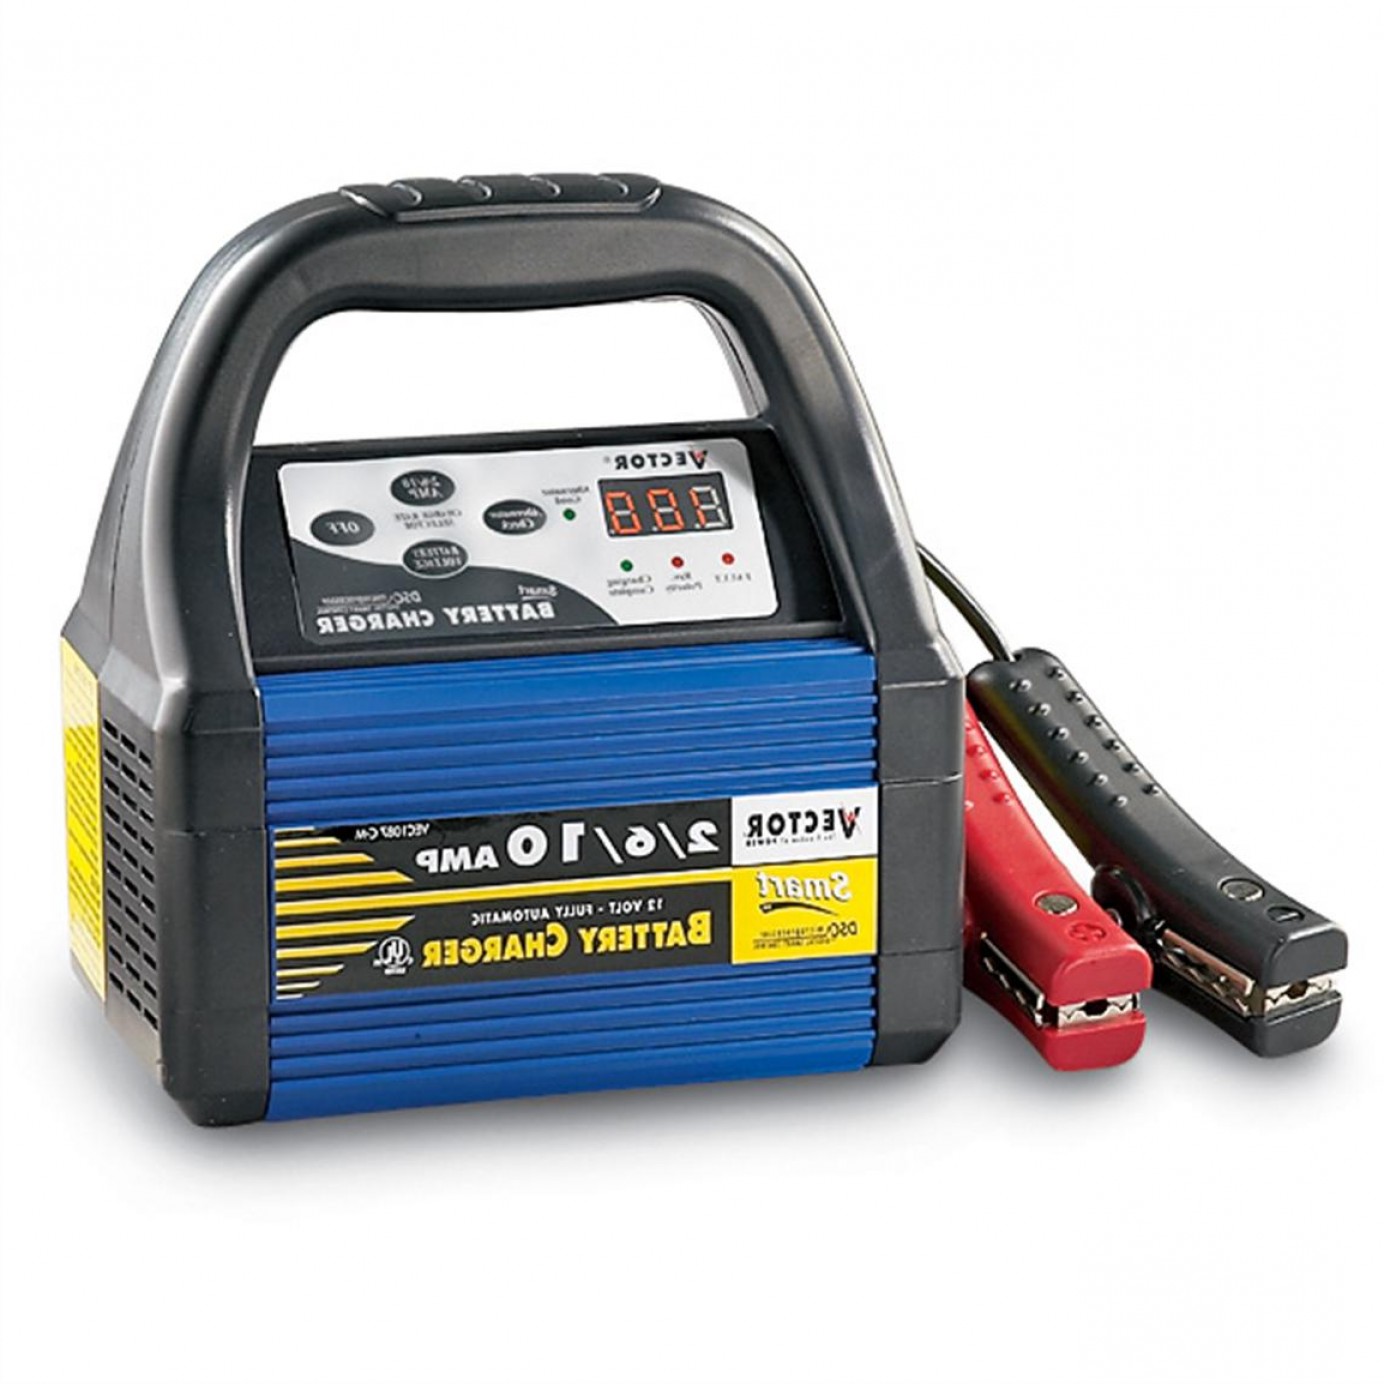 Vector 12v Battery Charger at Vectorified.com | Collection of Vector